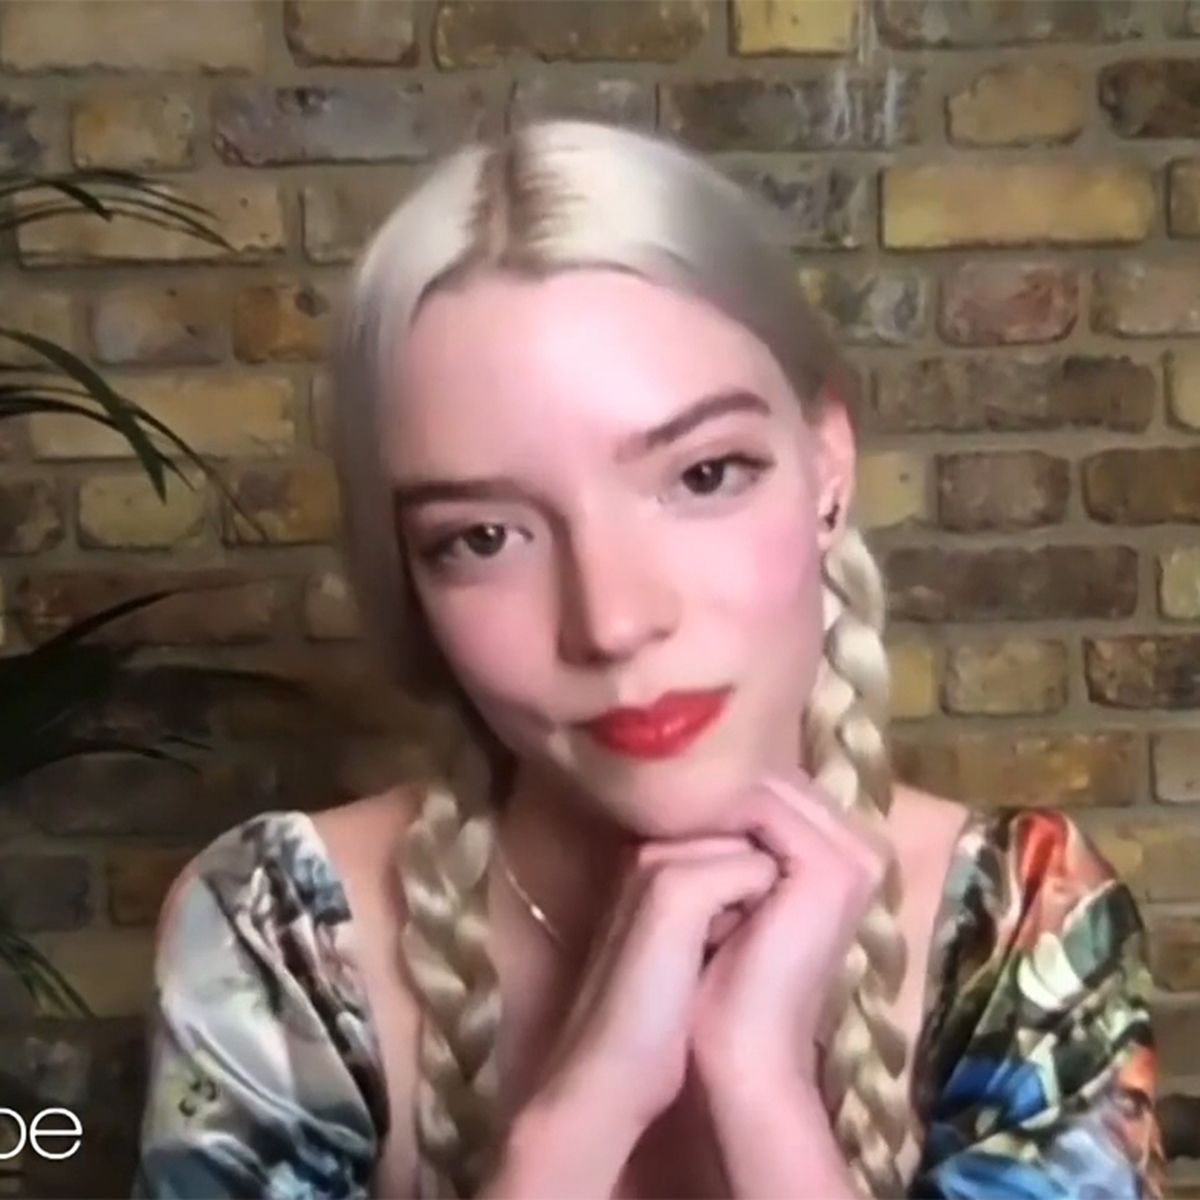 Anya Taylor-Joy Interview: The 'Queen's Gambit' Star on Life